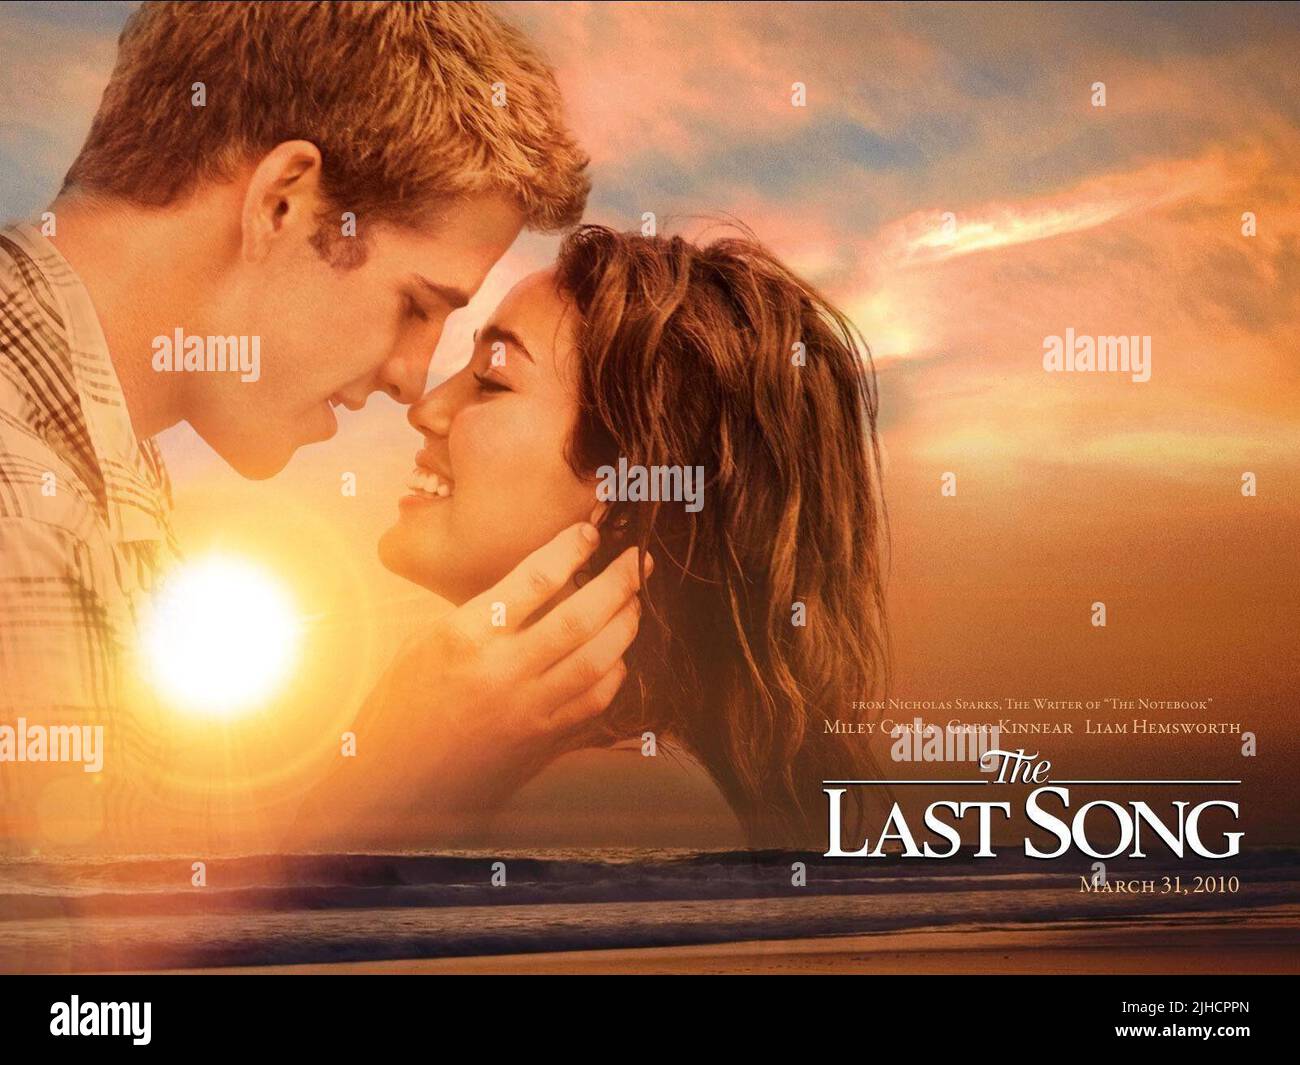 LIAM HEMSWORTH, MILEY CYRUS POSTER, THE LAST SONG, 2010 Stock Photo